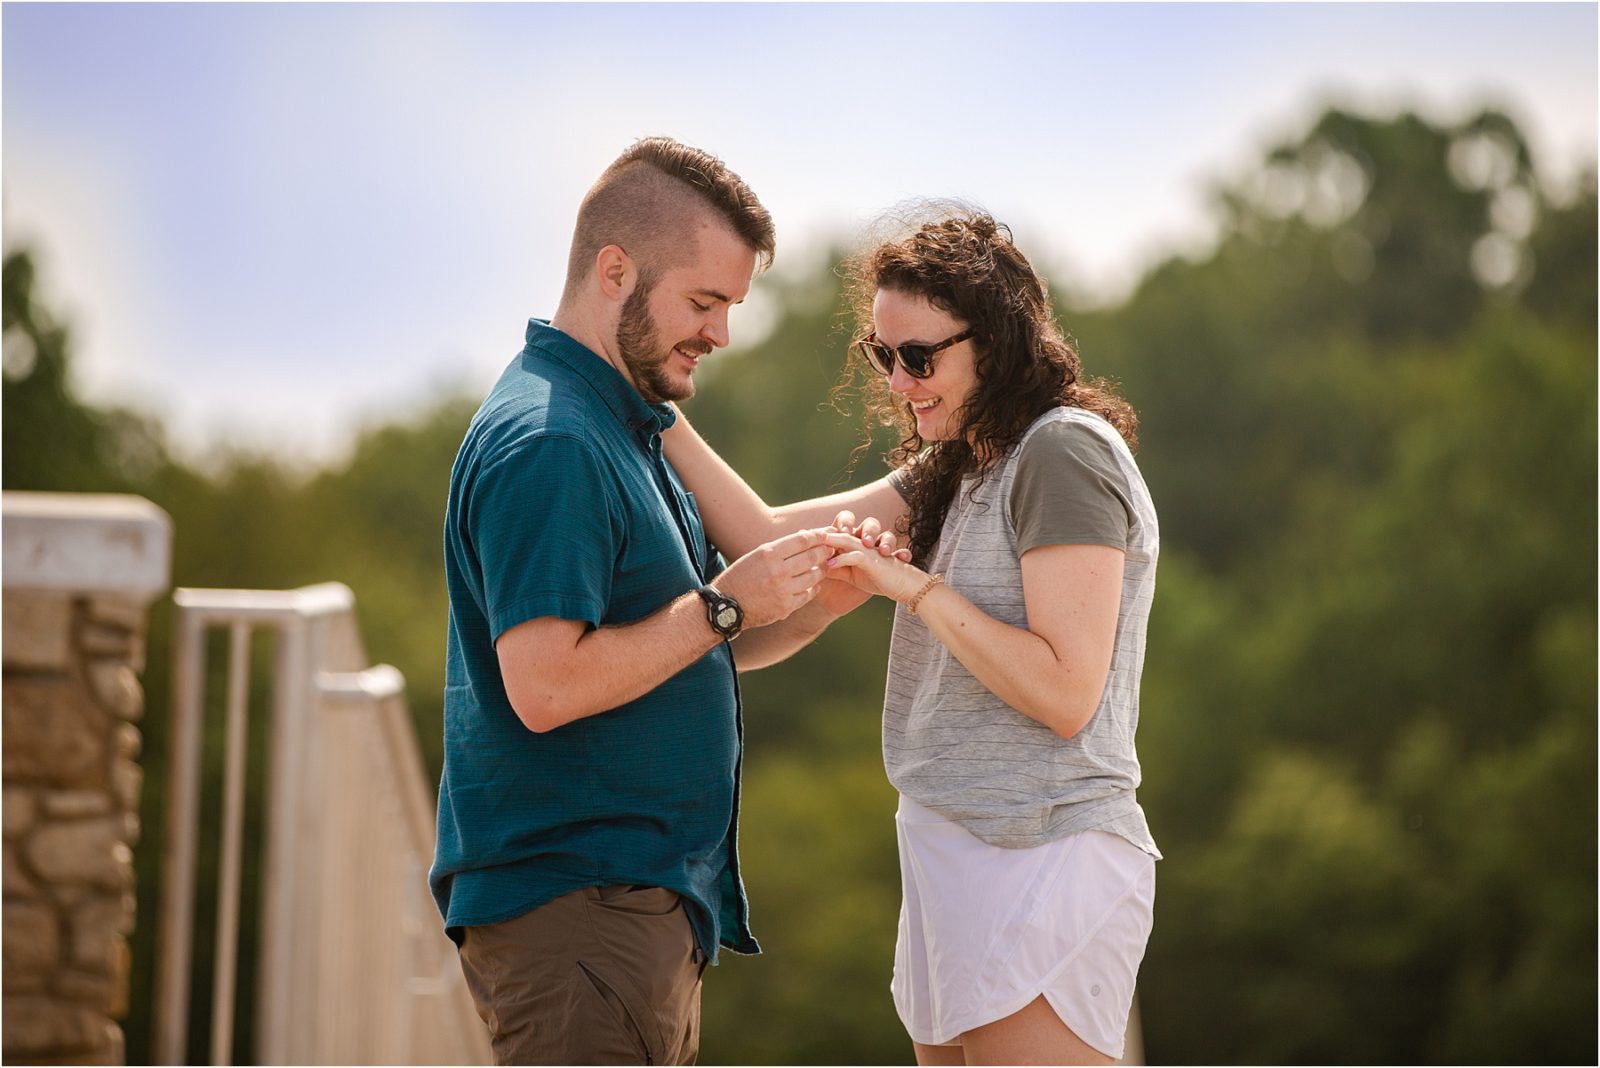 Woman with sunglasses looks at engagement ring as man puts it on her hand